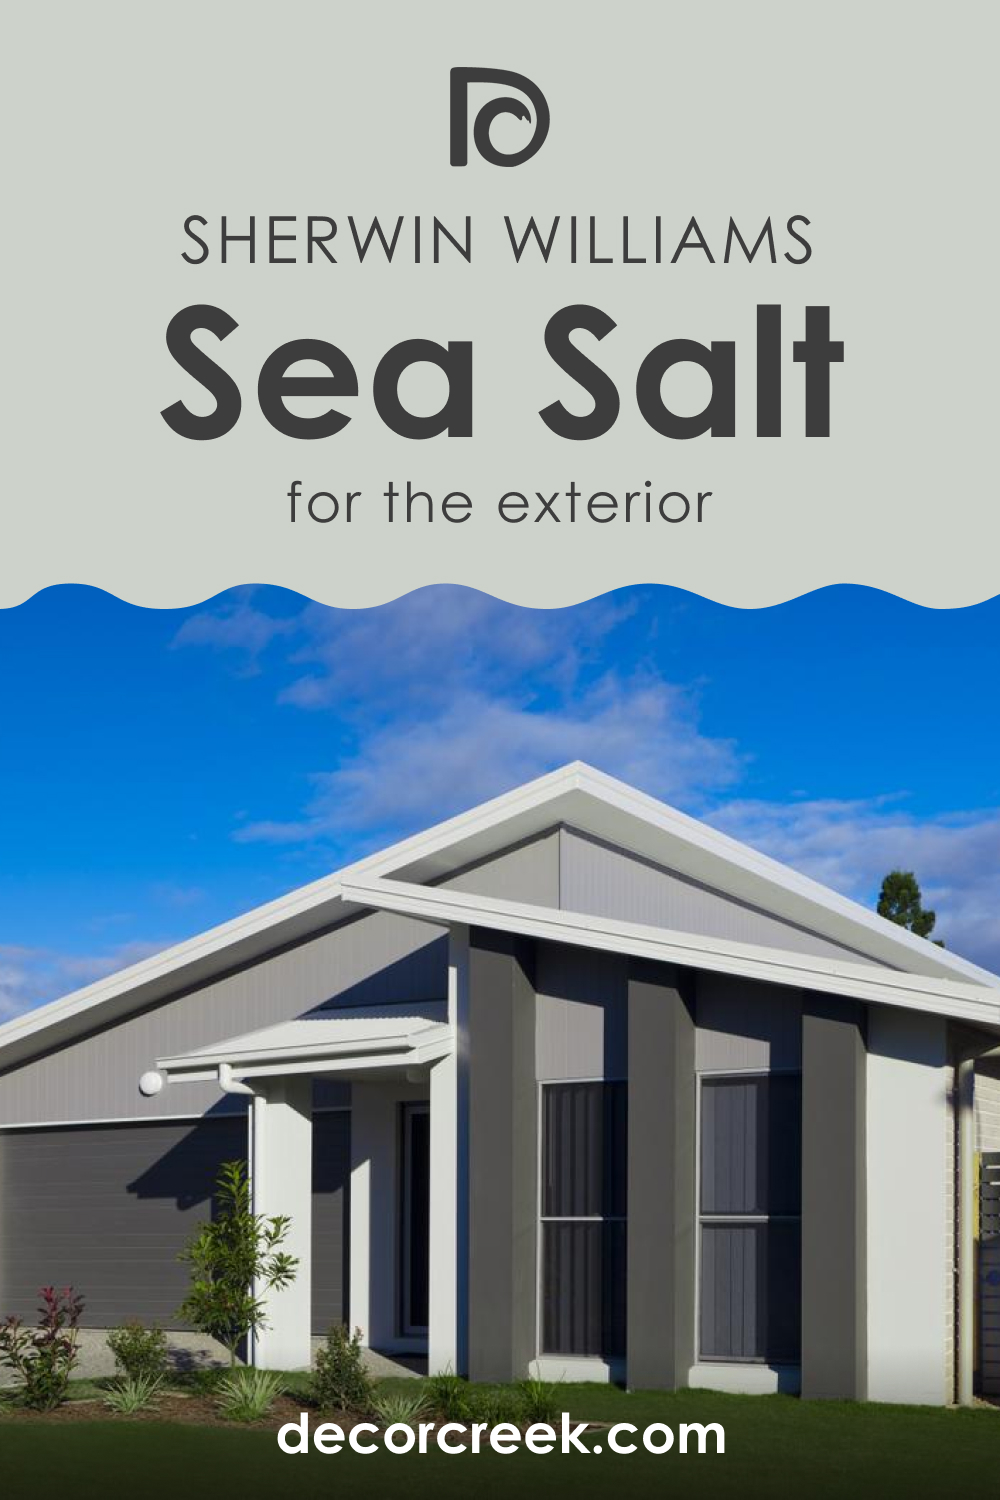 How to Use Sea Salt SW 6204 for an Exterior?